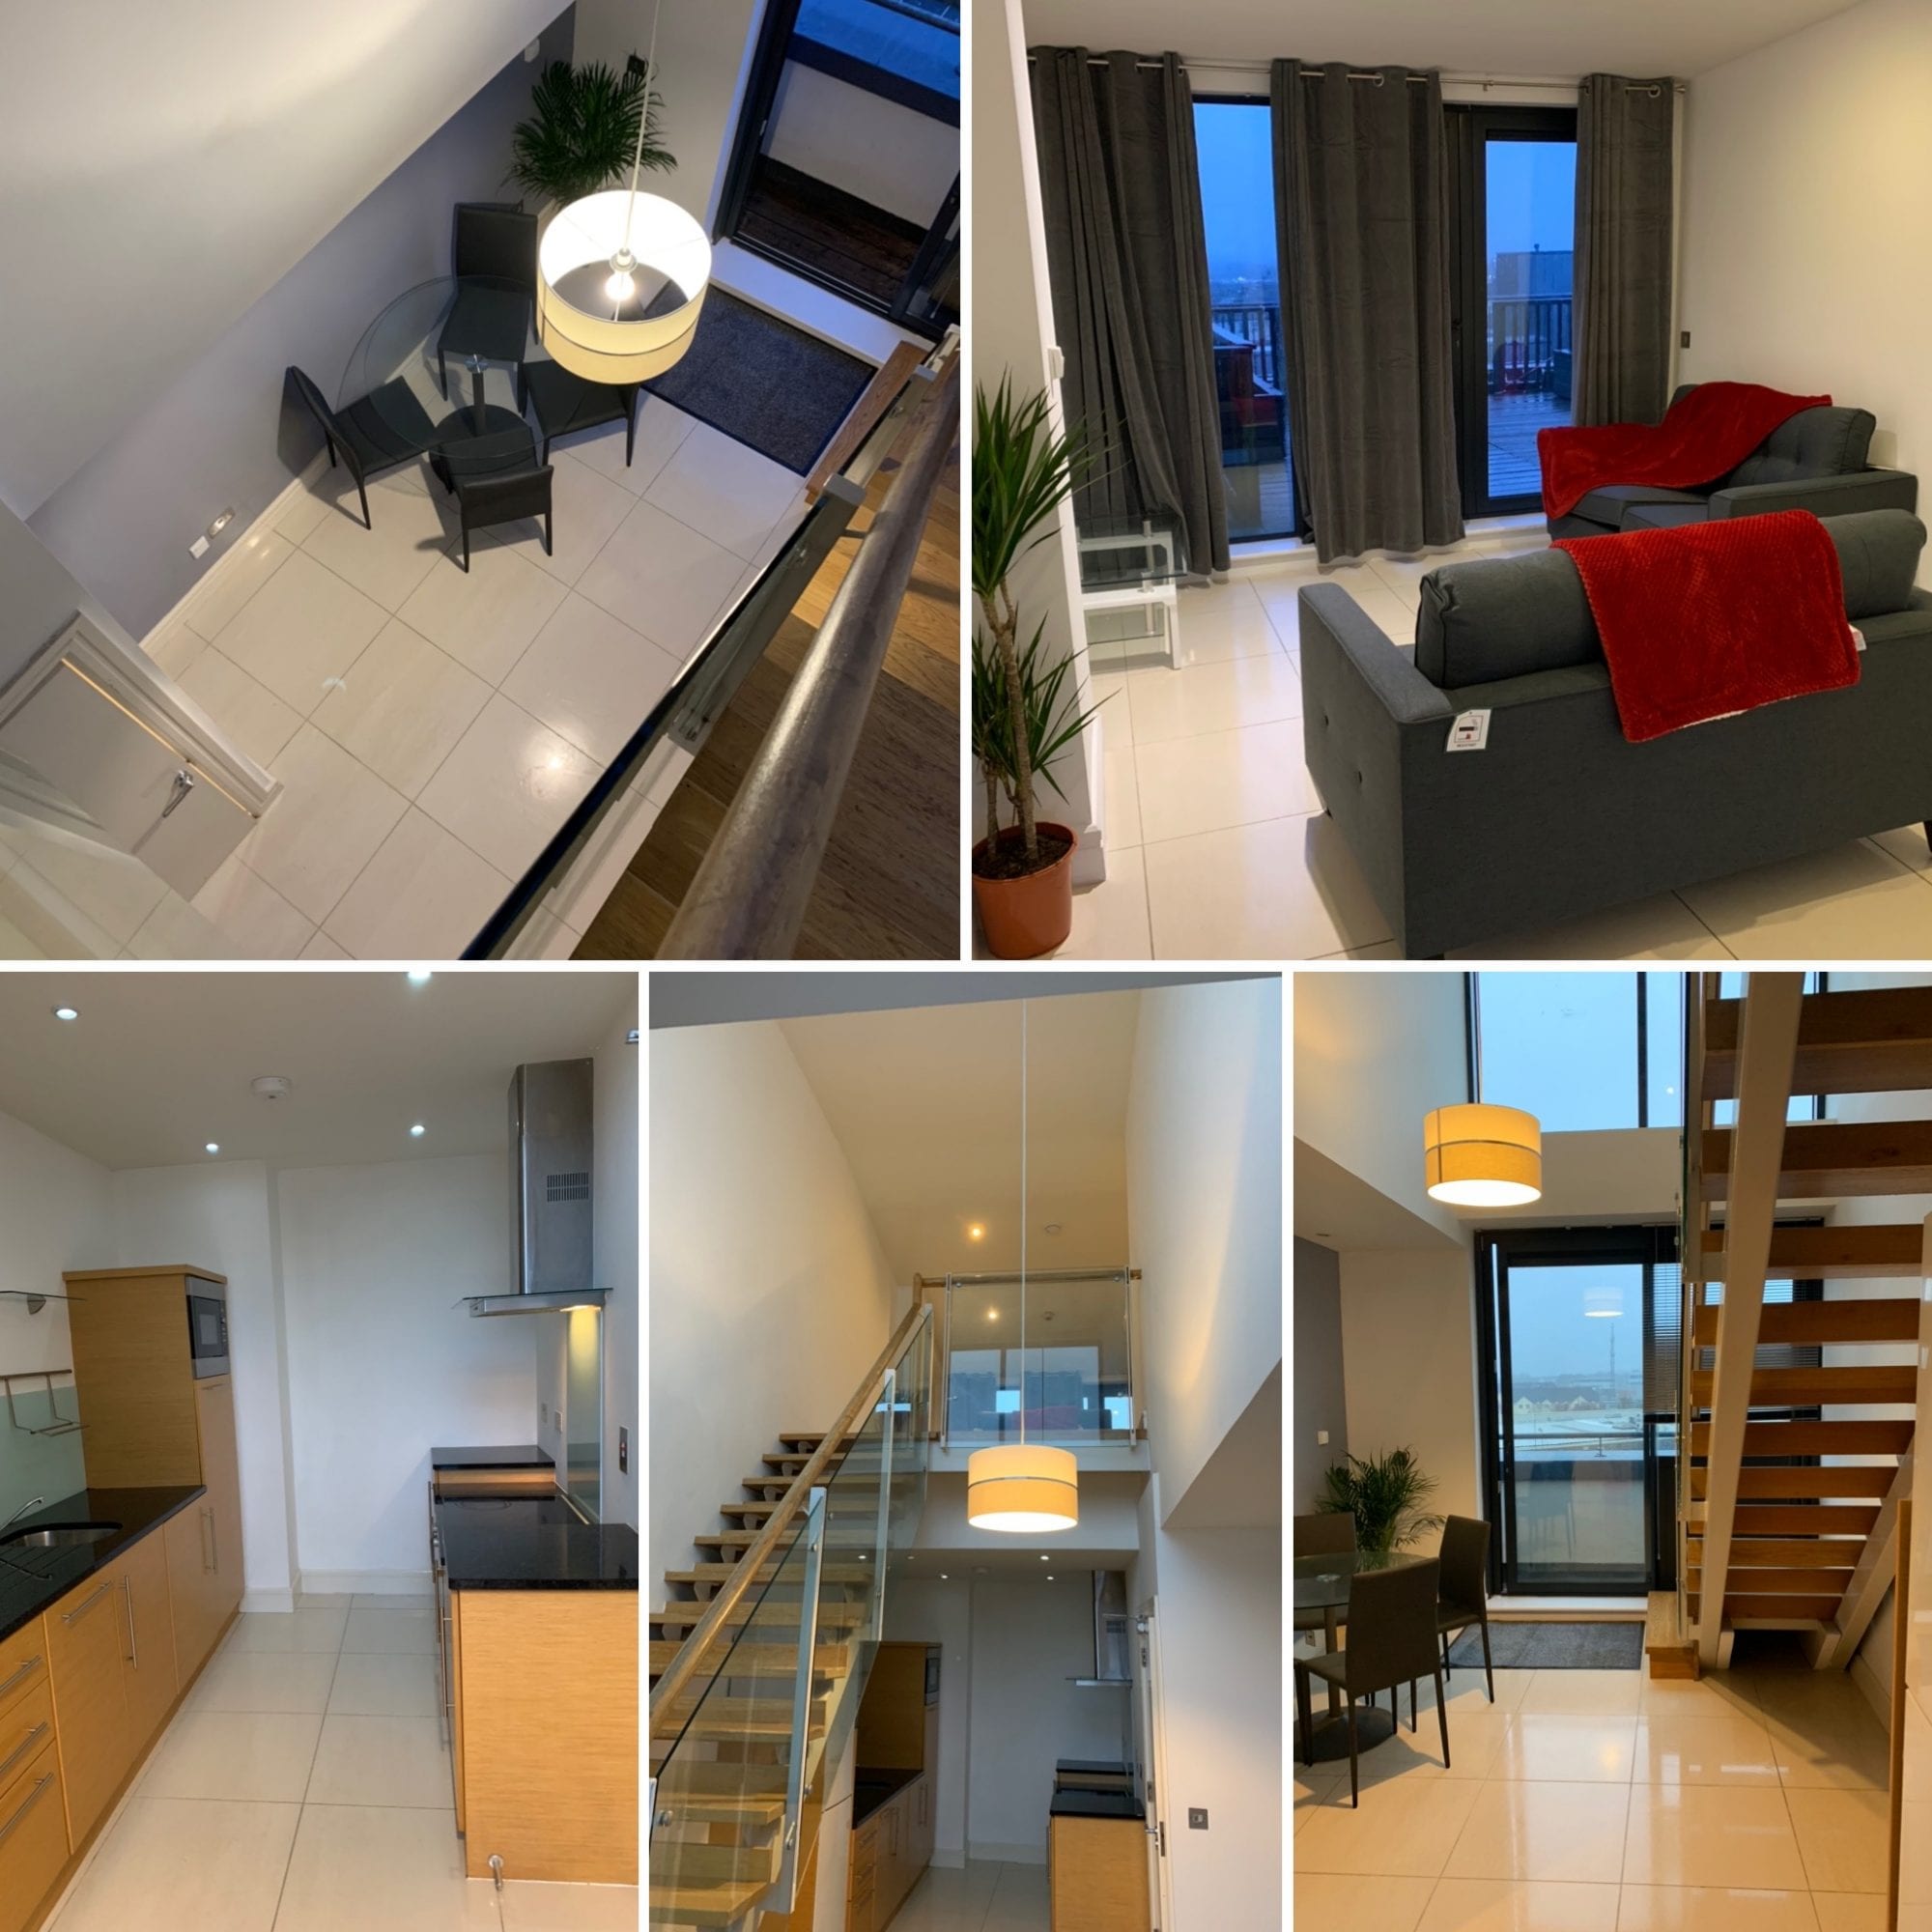 LL Solutions Property Management Photo. The ethos of the Company is to provide a high-quality service to Landlords & Property Managers from the first contact until the project has been completed and beyond with all works carried out to the highest standards at all times.